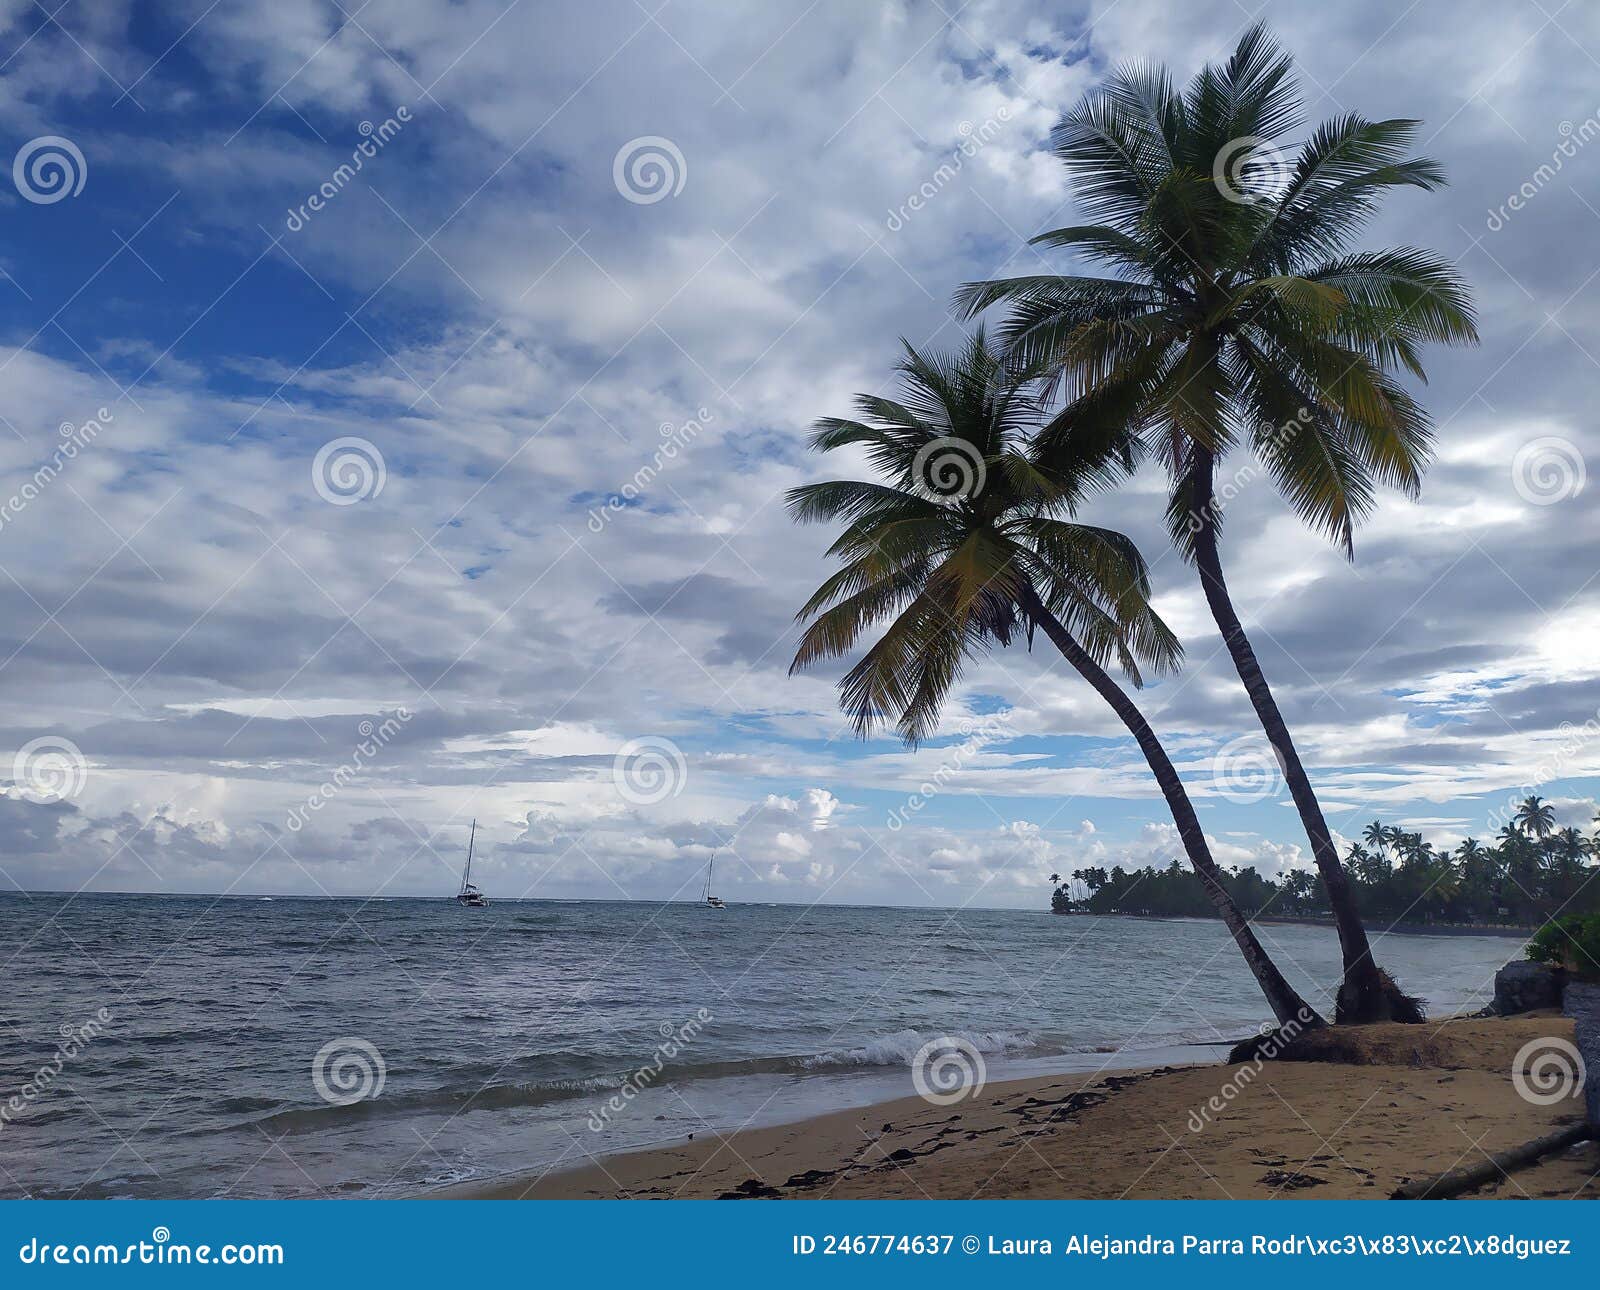 beach landscape with sailboats and palm trees